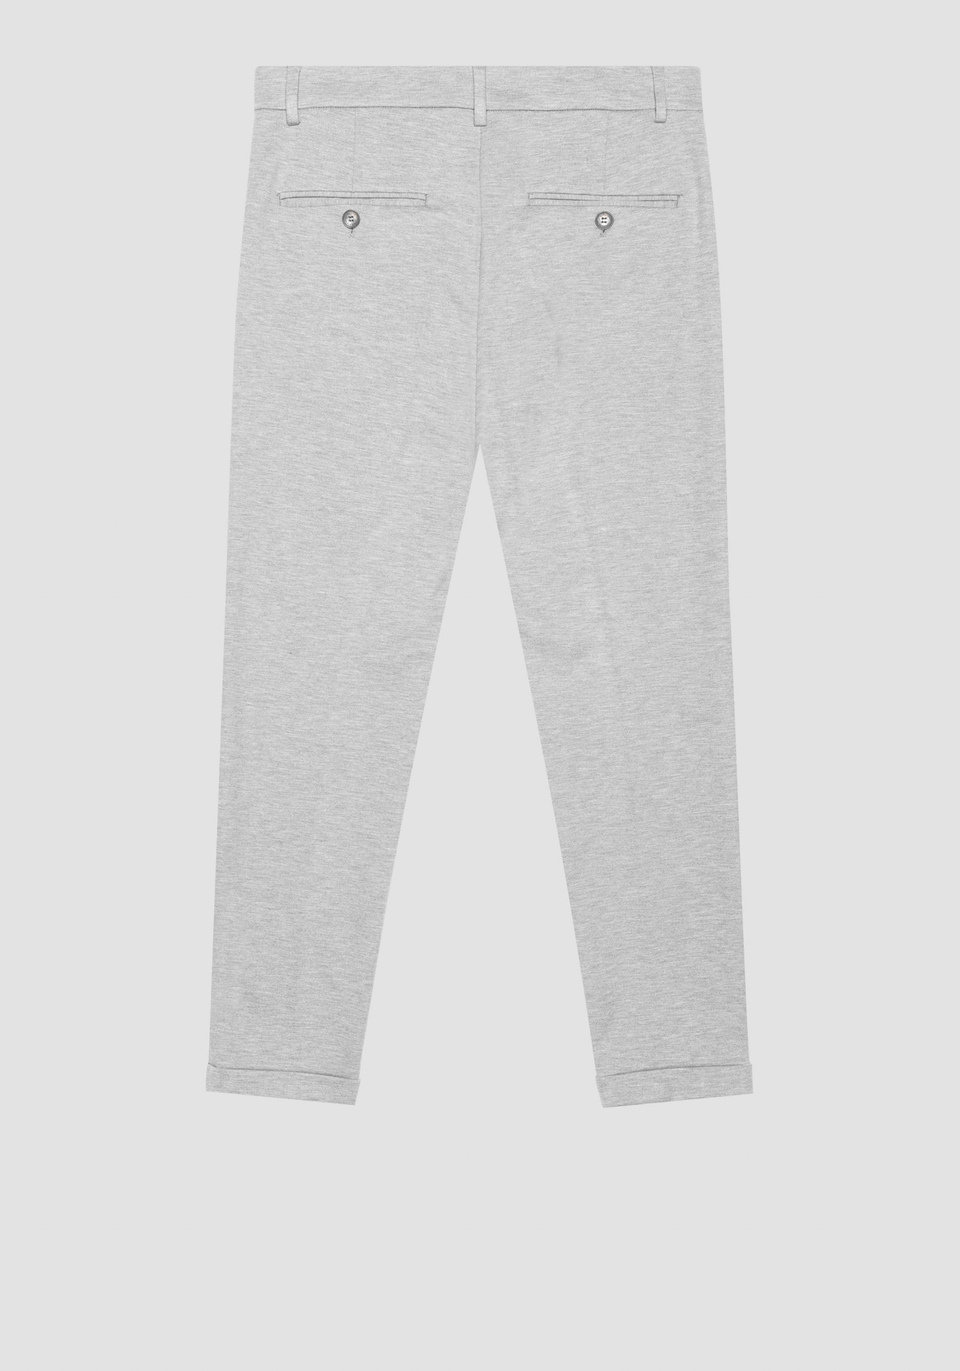 ASHE SUPER SKINNY FIT TROUSERS IN ELASTIC VISCOSE BLEND FABRIC - Antony Morato Online Shop